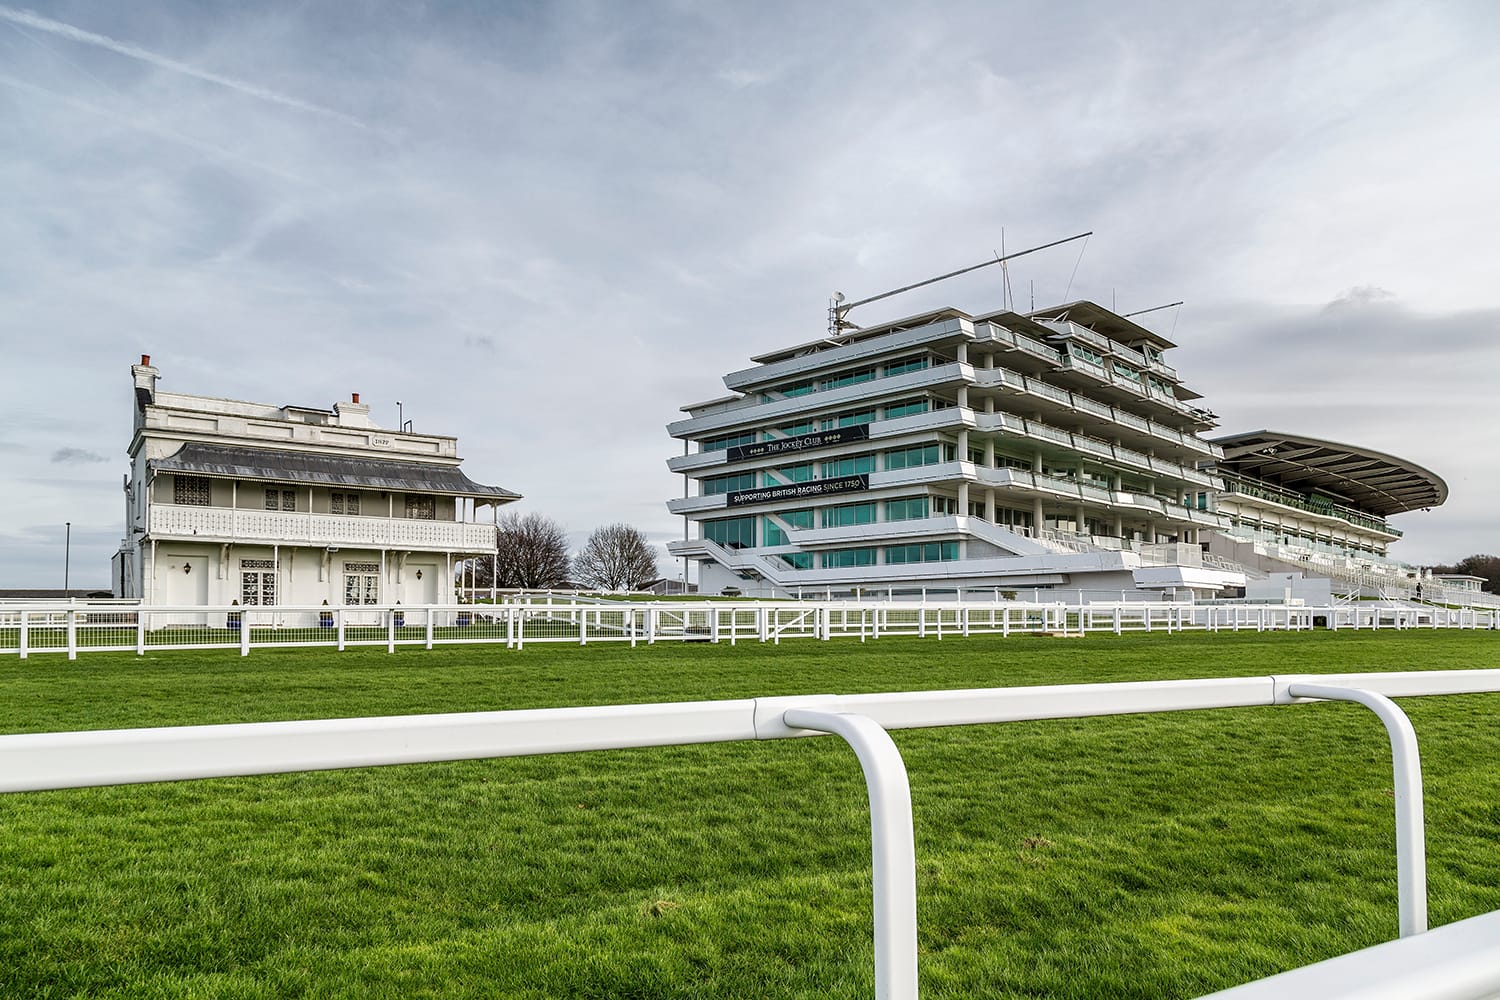 he Prince's Stand, Queens Stand and Duchess's Stand at Epsom Downs racecourse pictured on a non race day.